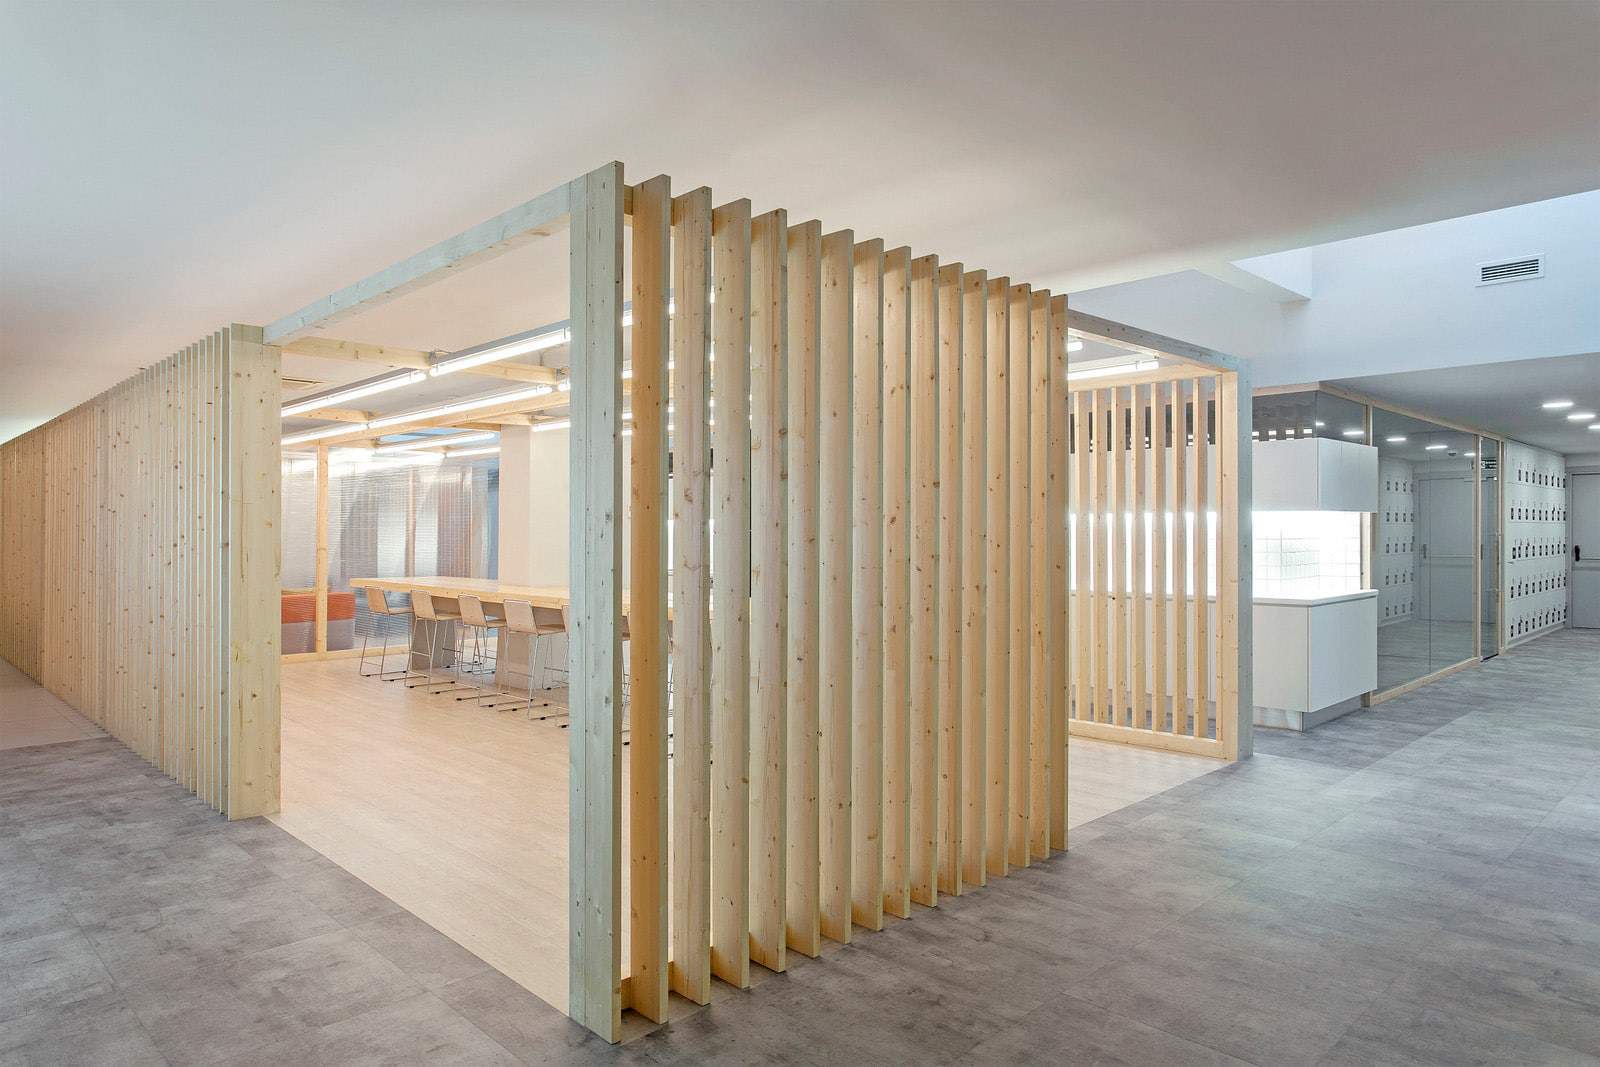 Meeting room with shutter style wood frame walls